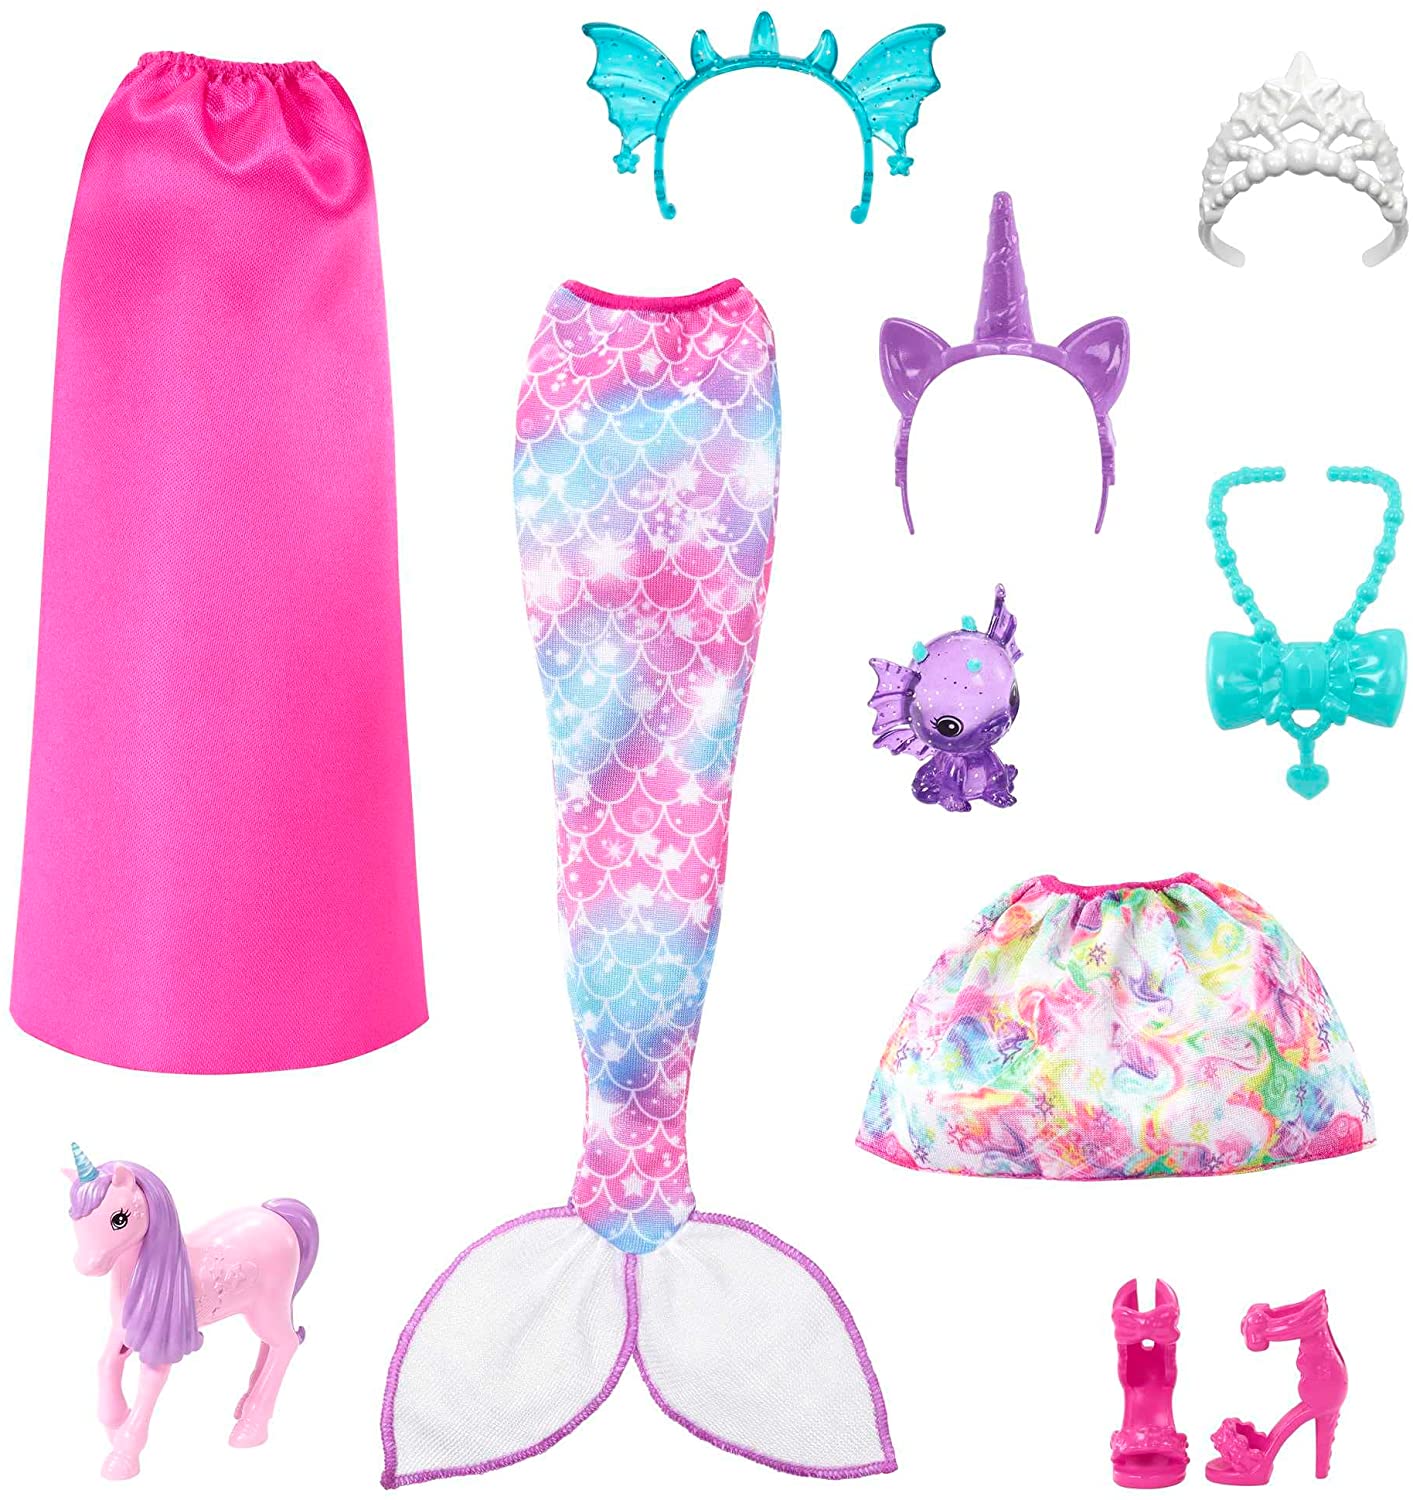 Barbie Mermaid Fantasy Dress-Up Clothes Set & Accessories Doll with Baby Unicorn and Dragon Pets for Kids Ages 3+